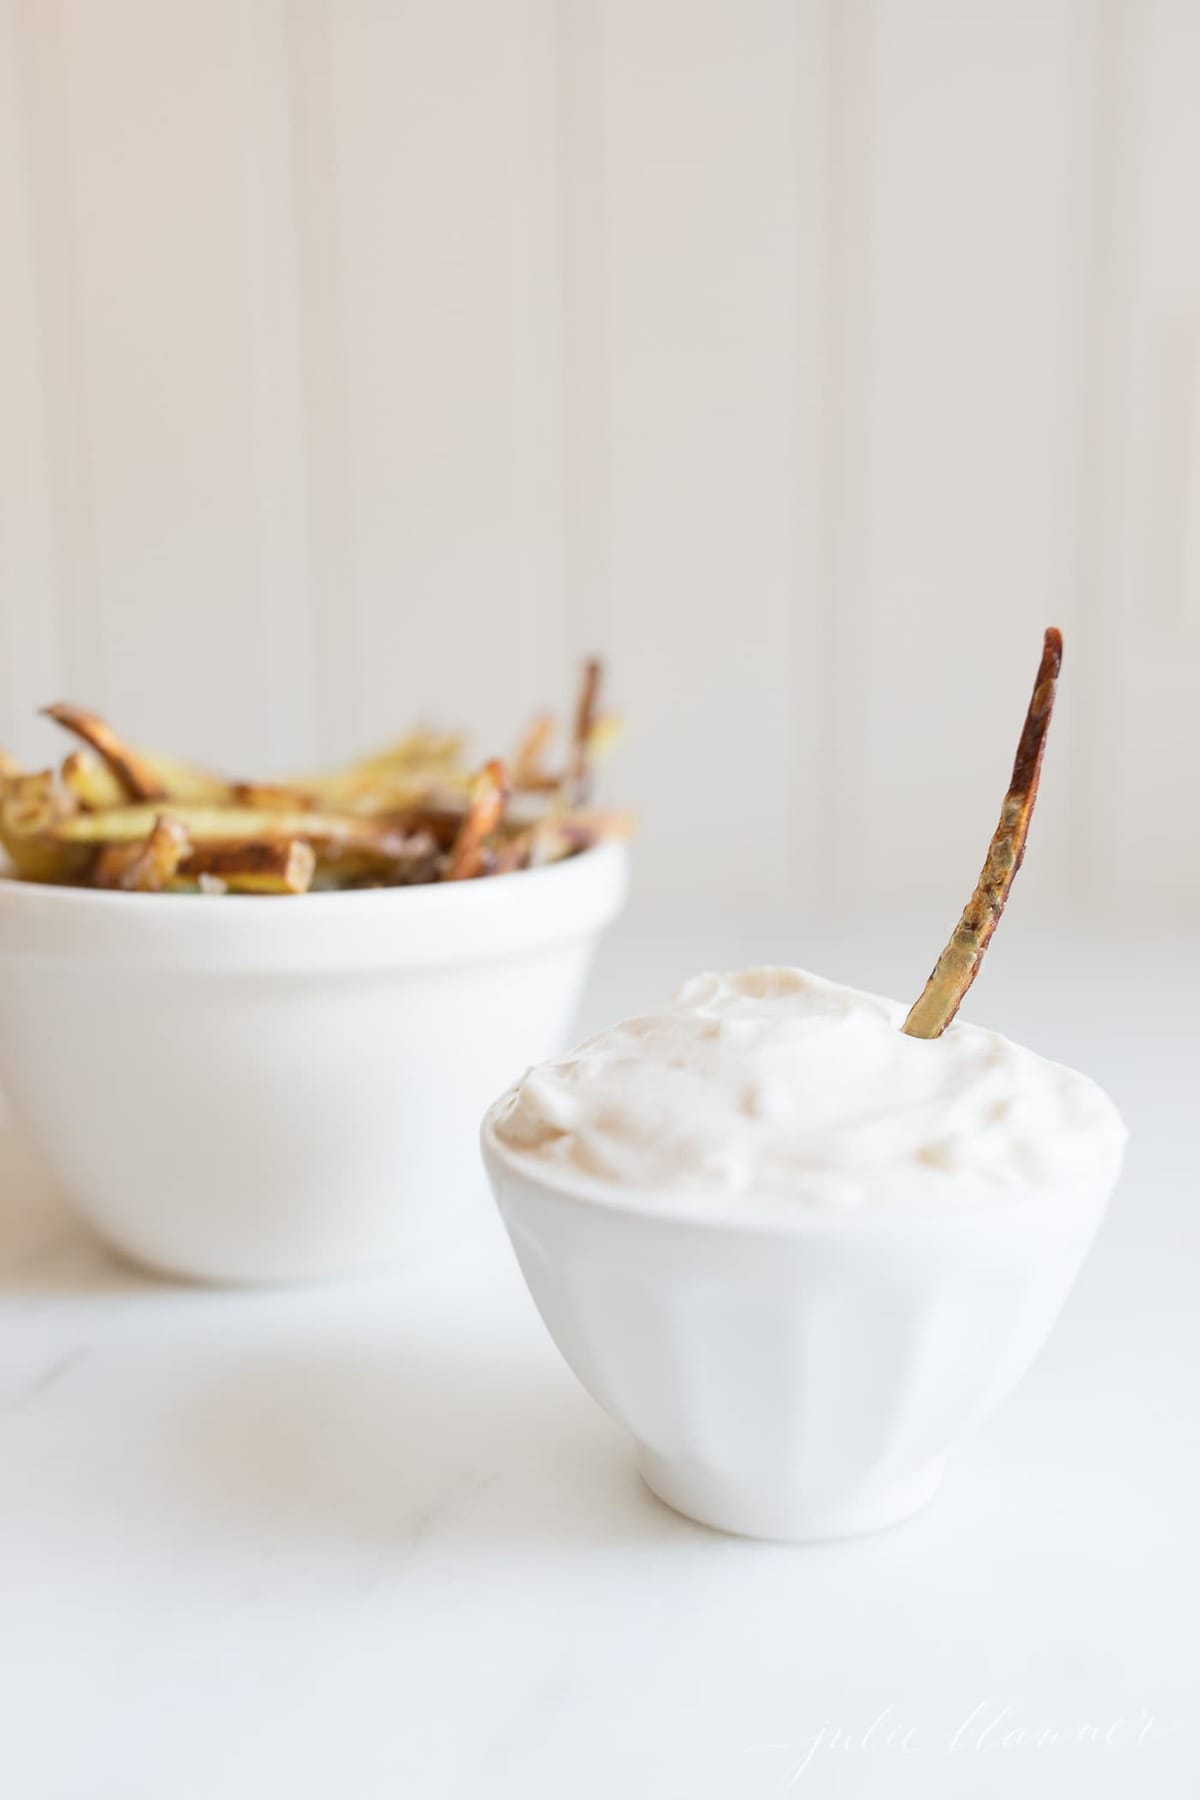 truffle mayo in a white bowl with fries in the background.